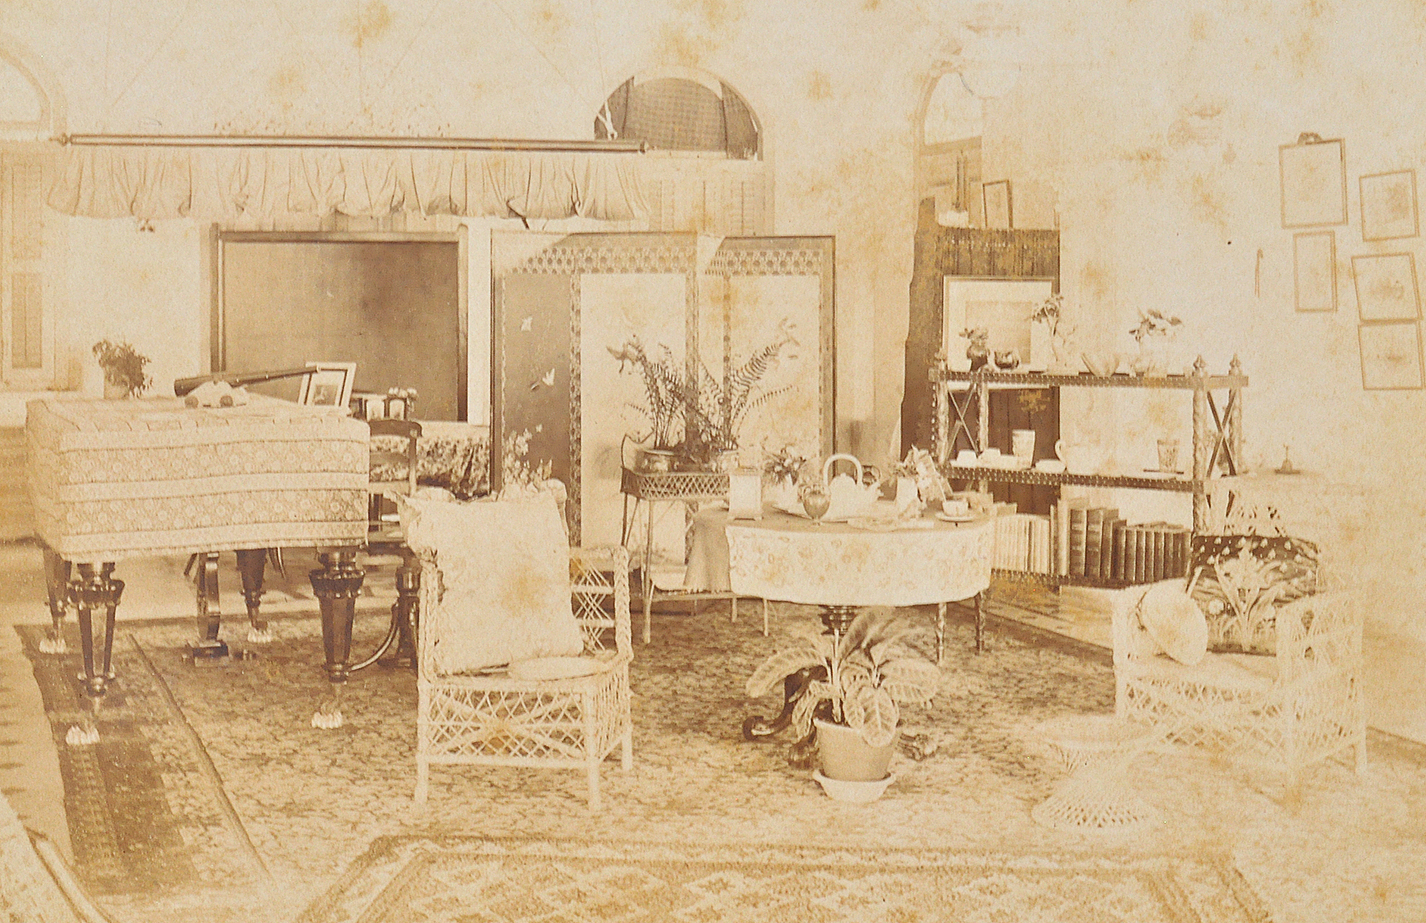 Malabar Hill Bungalow With Punkah - Old Photo 1890